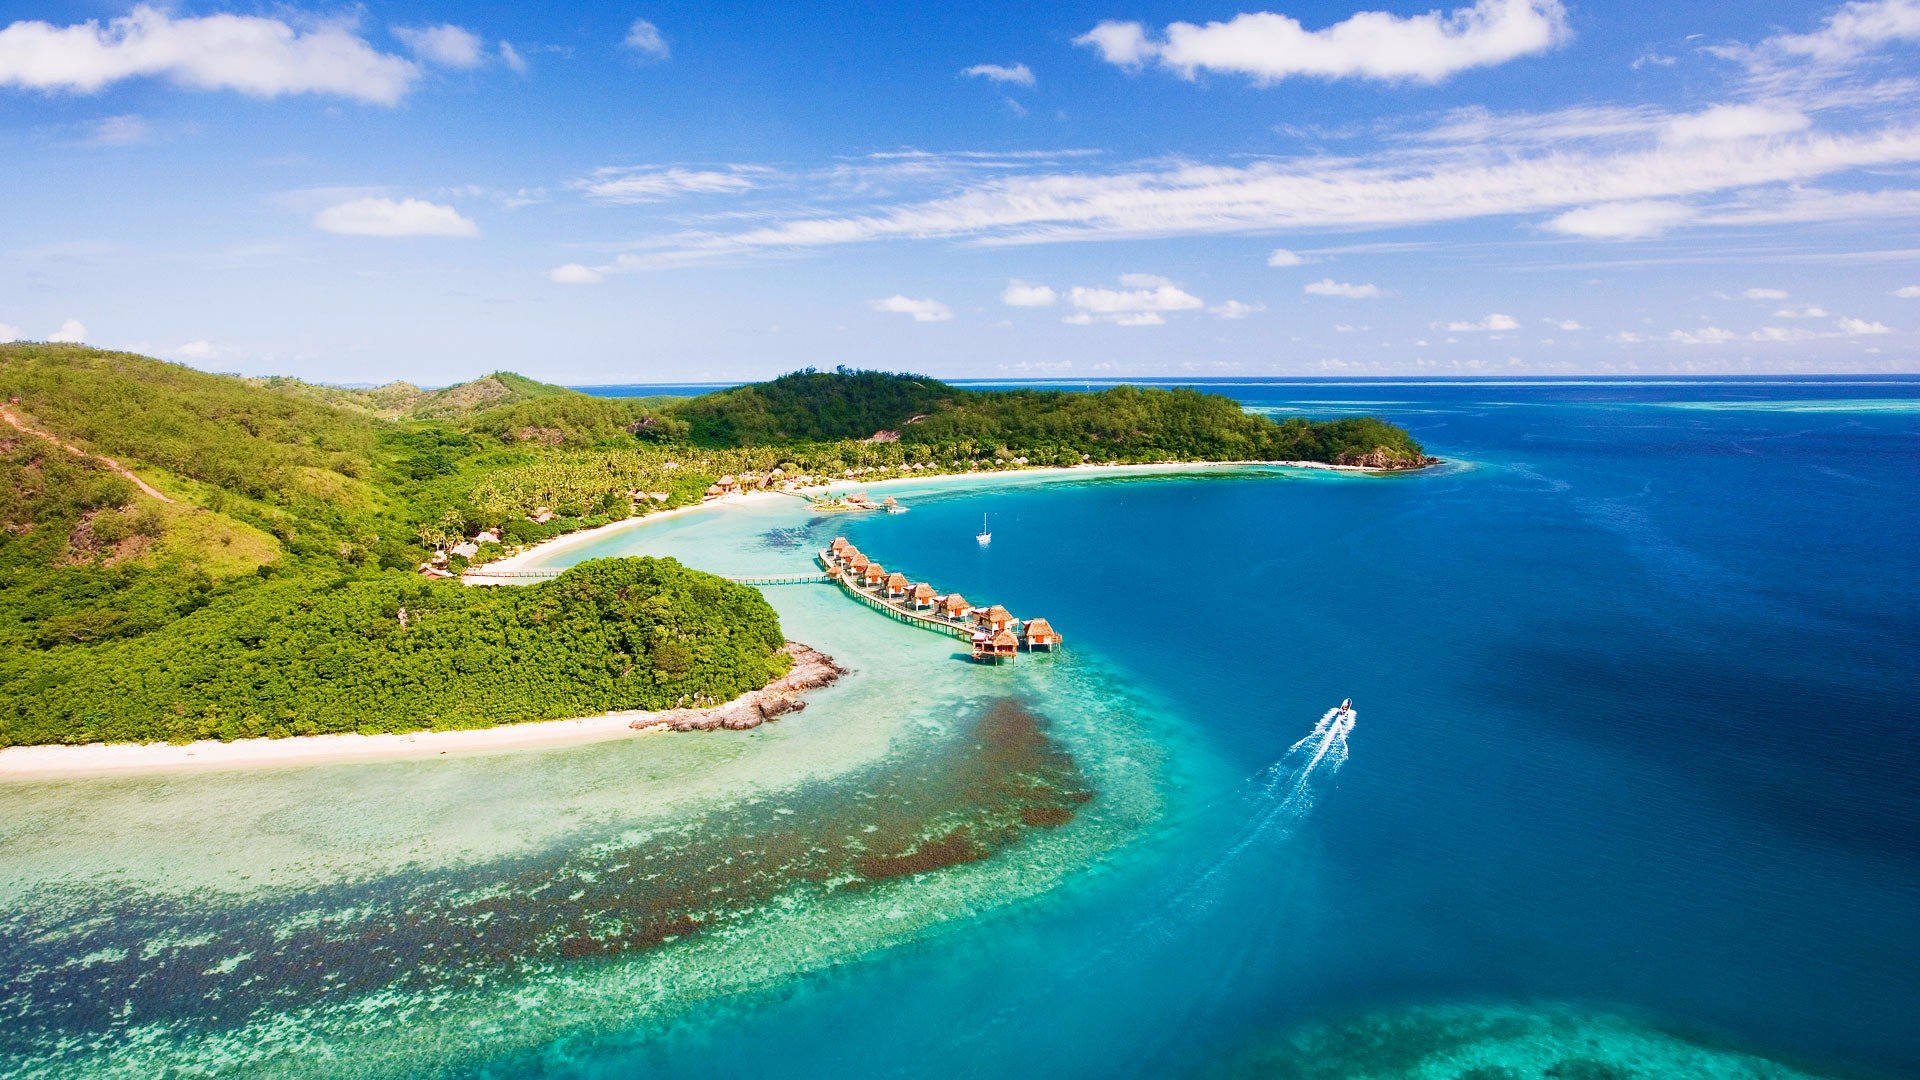 <p>Fiji is known for its stunning beaches and crystal-clear waters, and there’s no better way to experience this than by staying at a private island resort. These secluded beachfronts offer guests the ultimate in luxury and privacy, with pristine white sand beaches and turquoise waters just steps from their door.</p><p><a href="https://likulikulagoon.com/"><strong>One of Fiji’s most popular private island resorts is the Likuliku Lagoon Resort.</strong> </a>This adults-only resort features overwater bungalows, beachfront villas, and traditional Fijian bures with stunning ocean views. Guests can enjoy various activities, from snorkeling and diving to island-hopping and cultural experiences.</p><p><strong>Another top pick for private island resorts in Fiji is the Laucala Island Resort.</strong> This exclusive resort features just 25 villas set on a 3,500-acre private island. Guests can enjoy their private beach, as well as a range of activities such as golf, horseback riding, and spa treatments.</p>